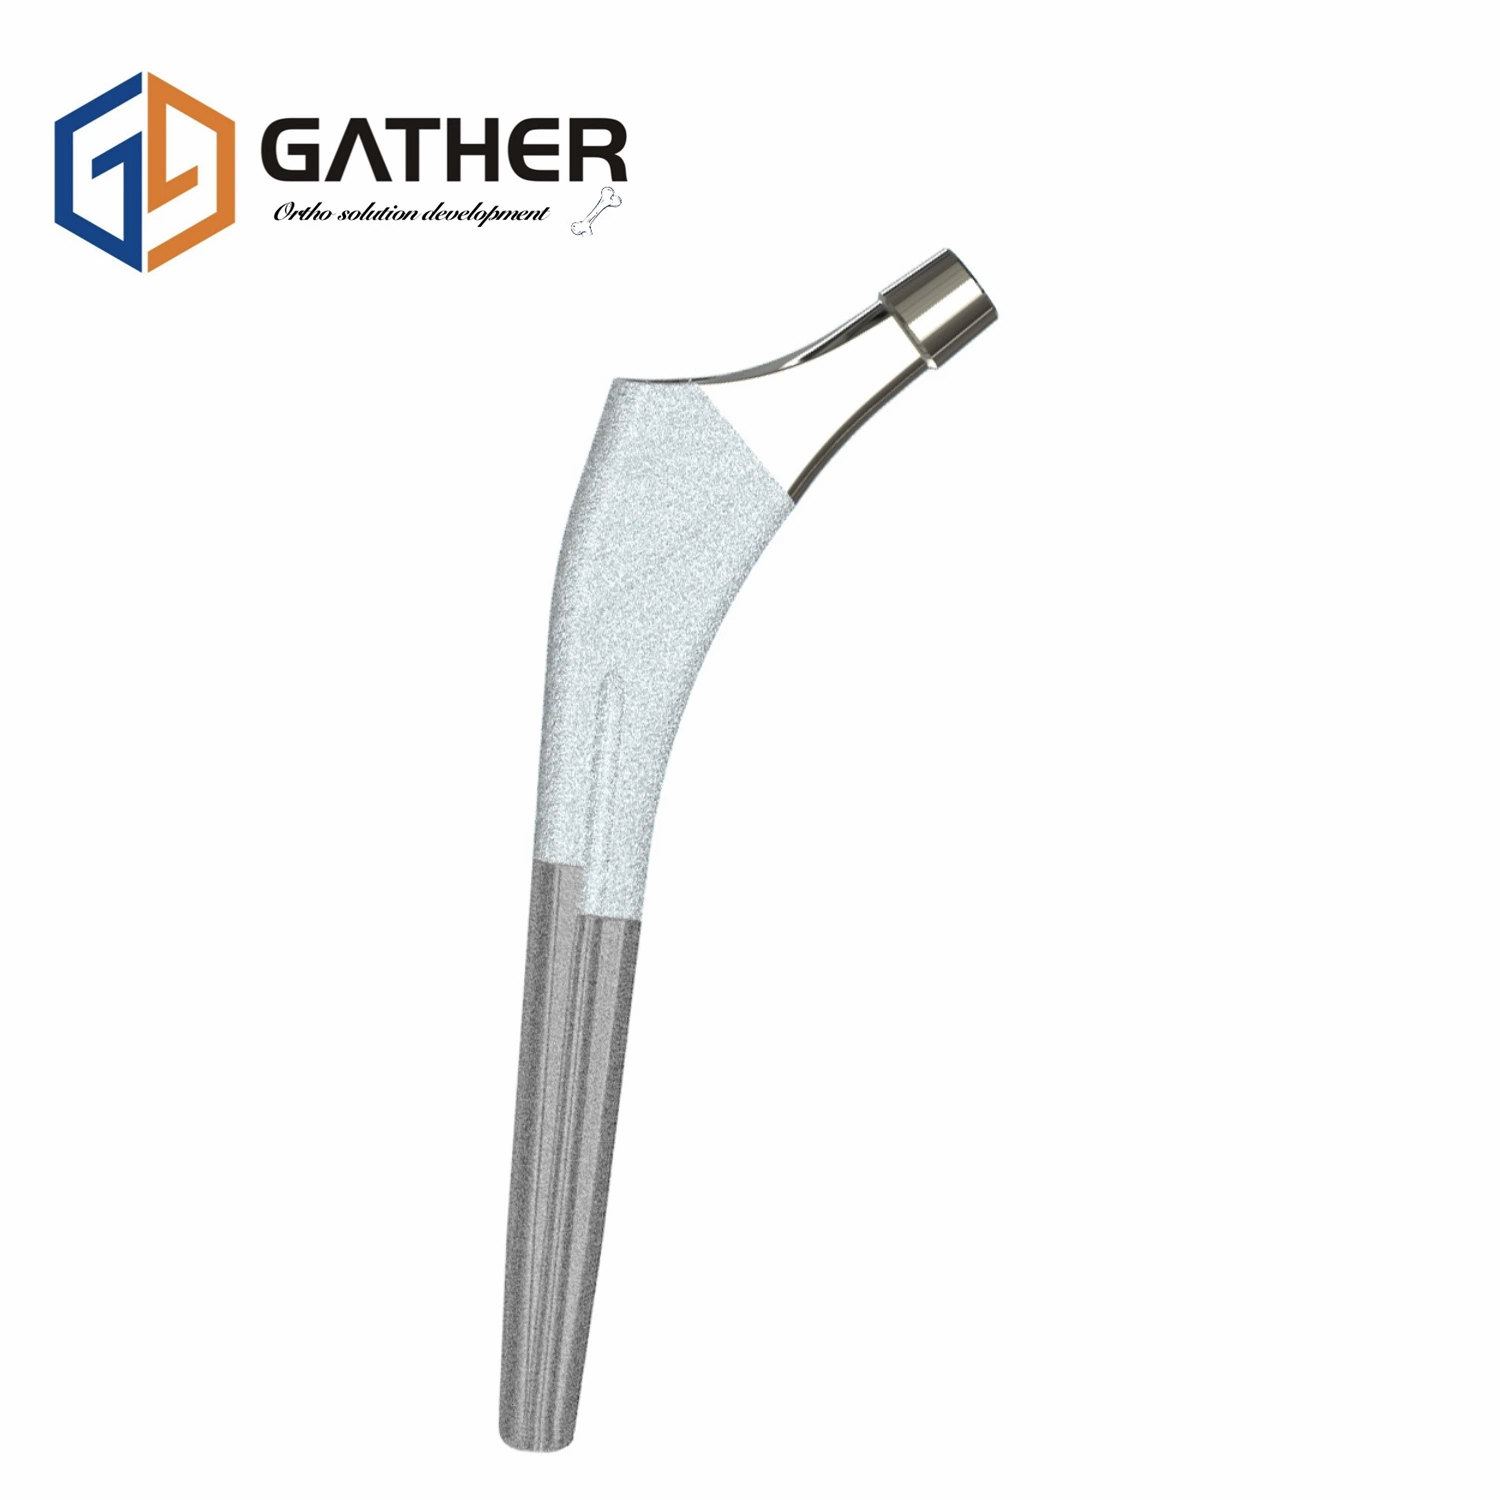 Orthopedic Artificial Hip Joint Surgical Instruments Ceramic Femoral Head Replacement Implant Factory Price